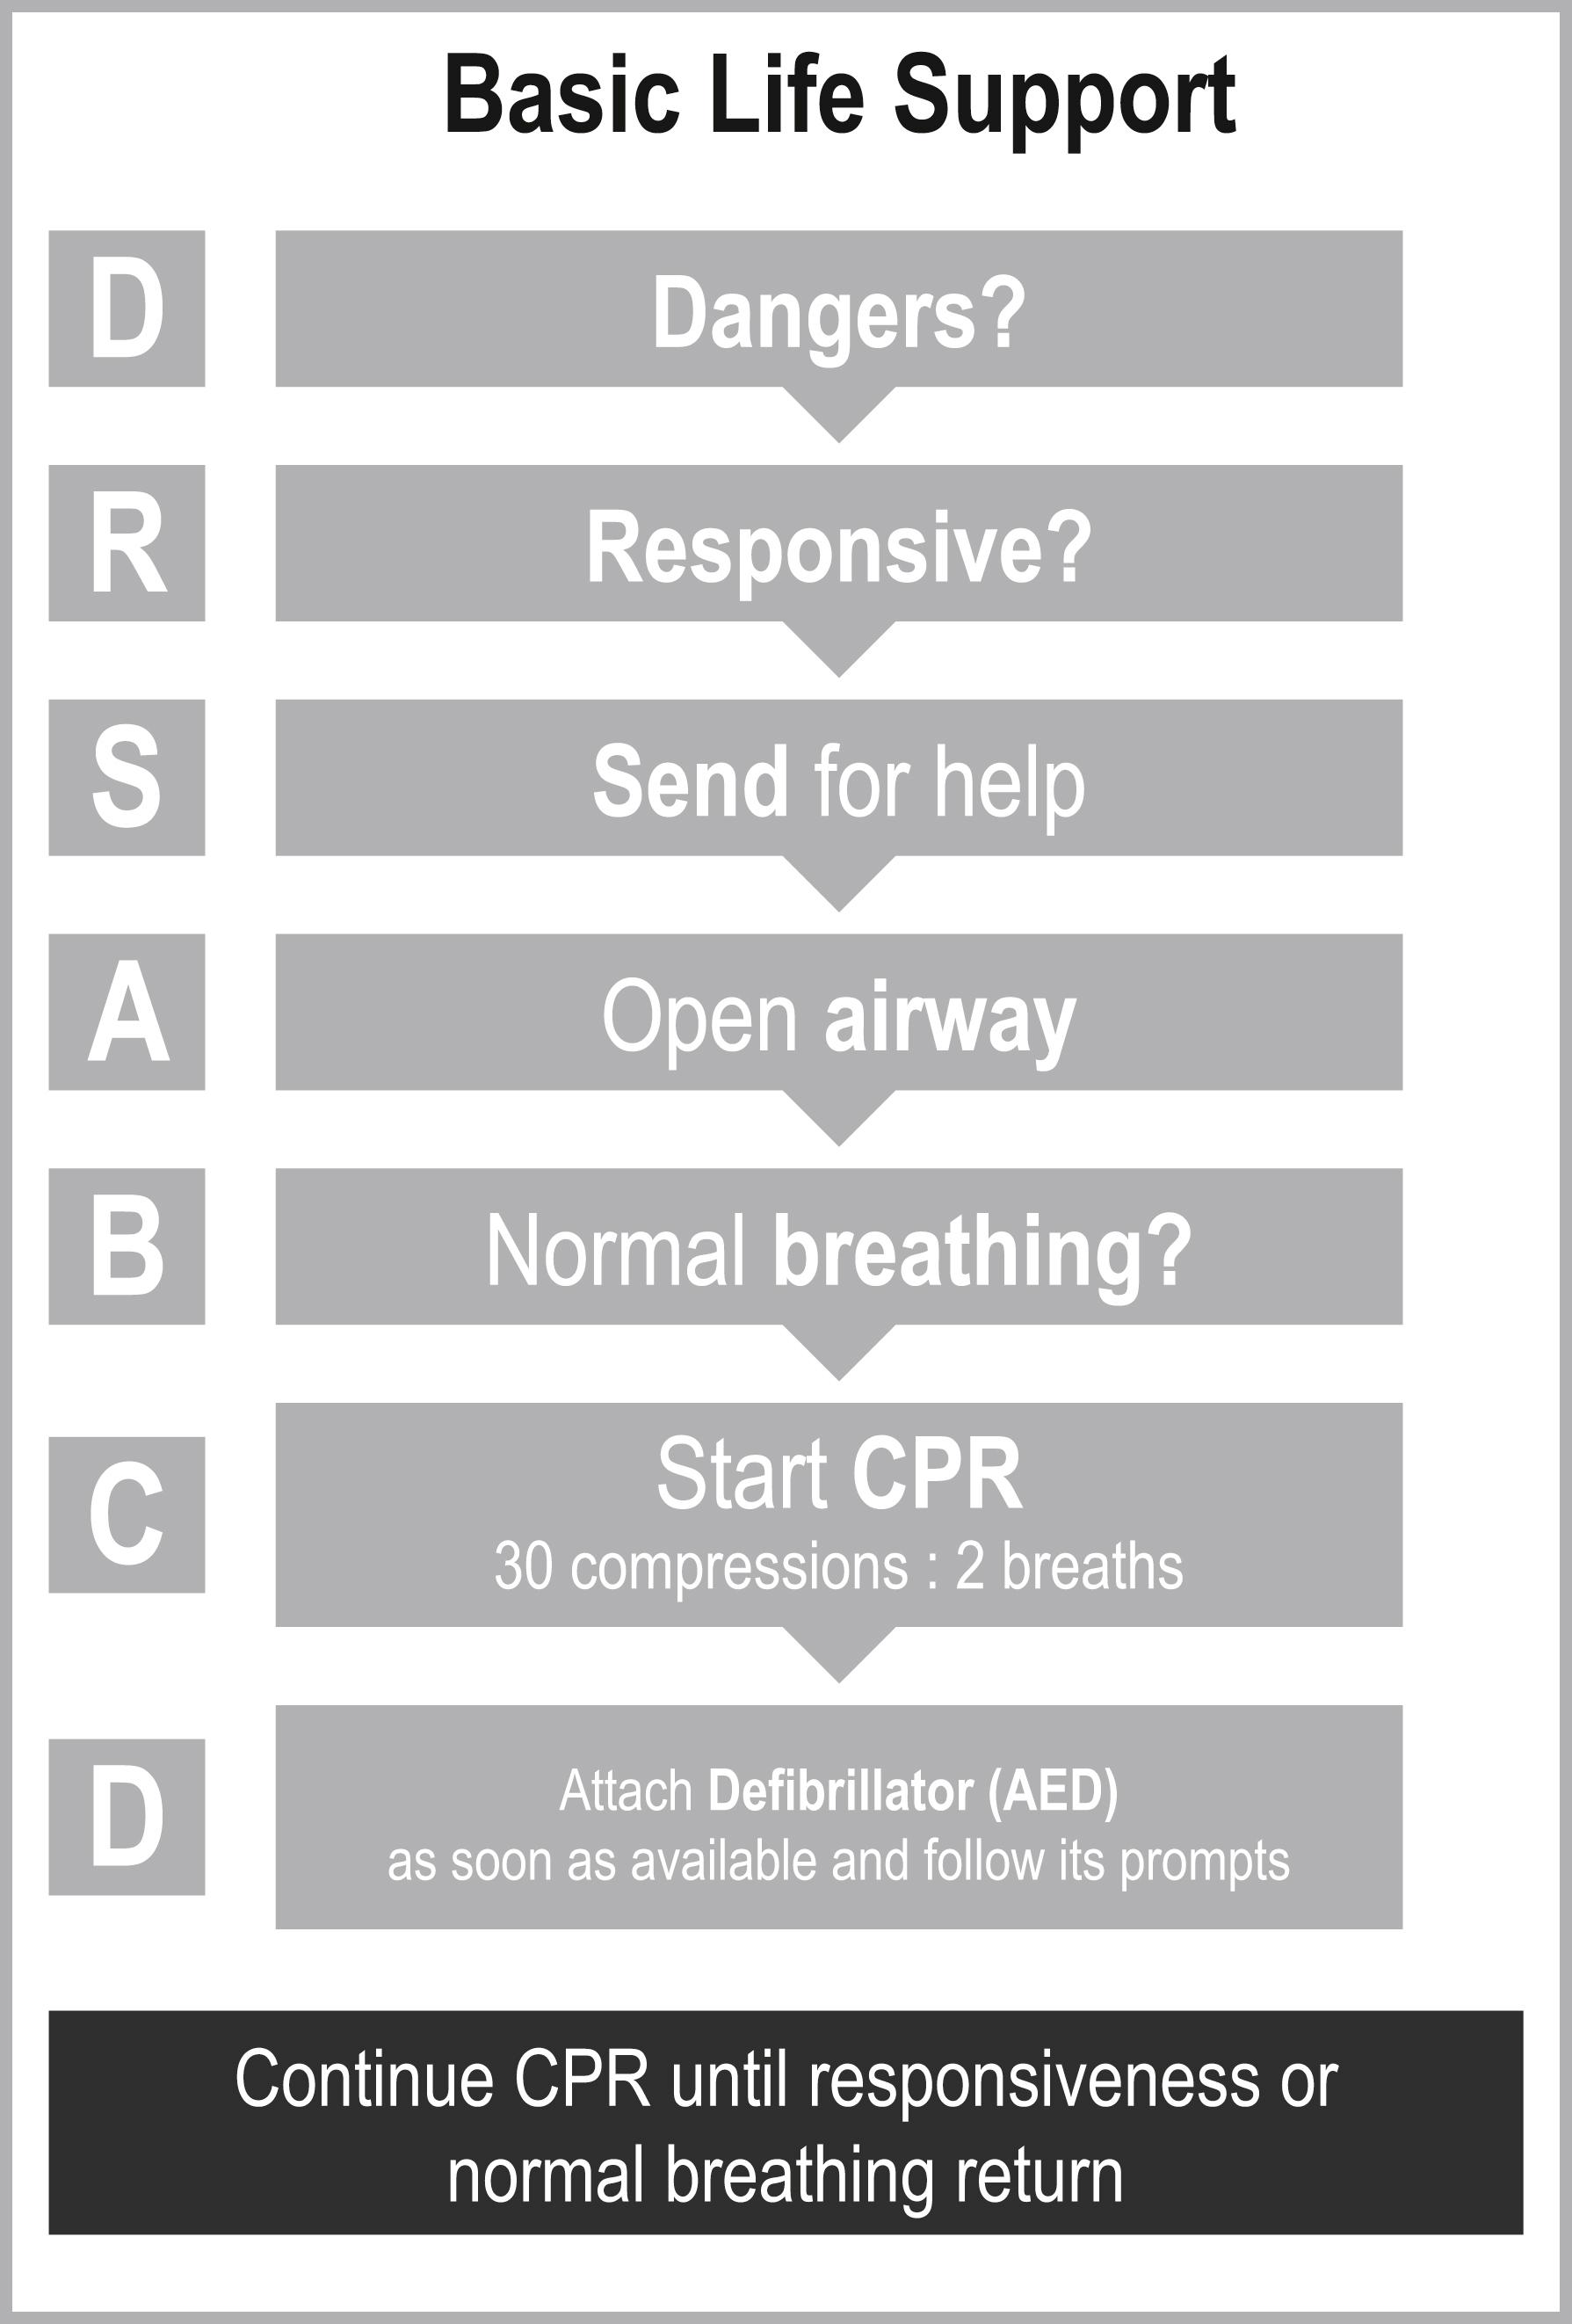 FIG. 1.1.1, Australian Resuscitation Council and New Zealand Resuscitation Council Basic Life Support flowchart. AED , Automated external defibrillator; CPR , cardiopulmonary resuscitation.